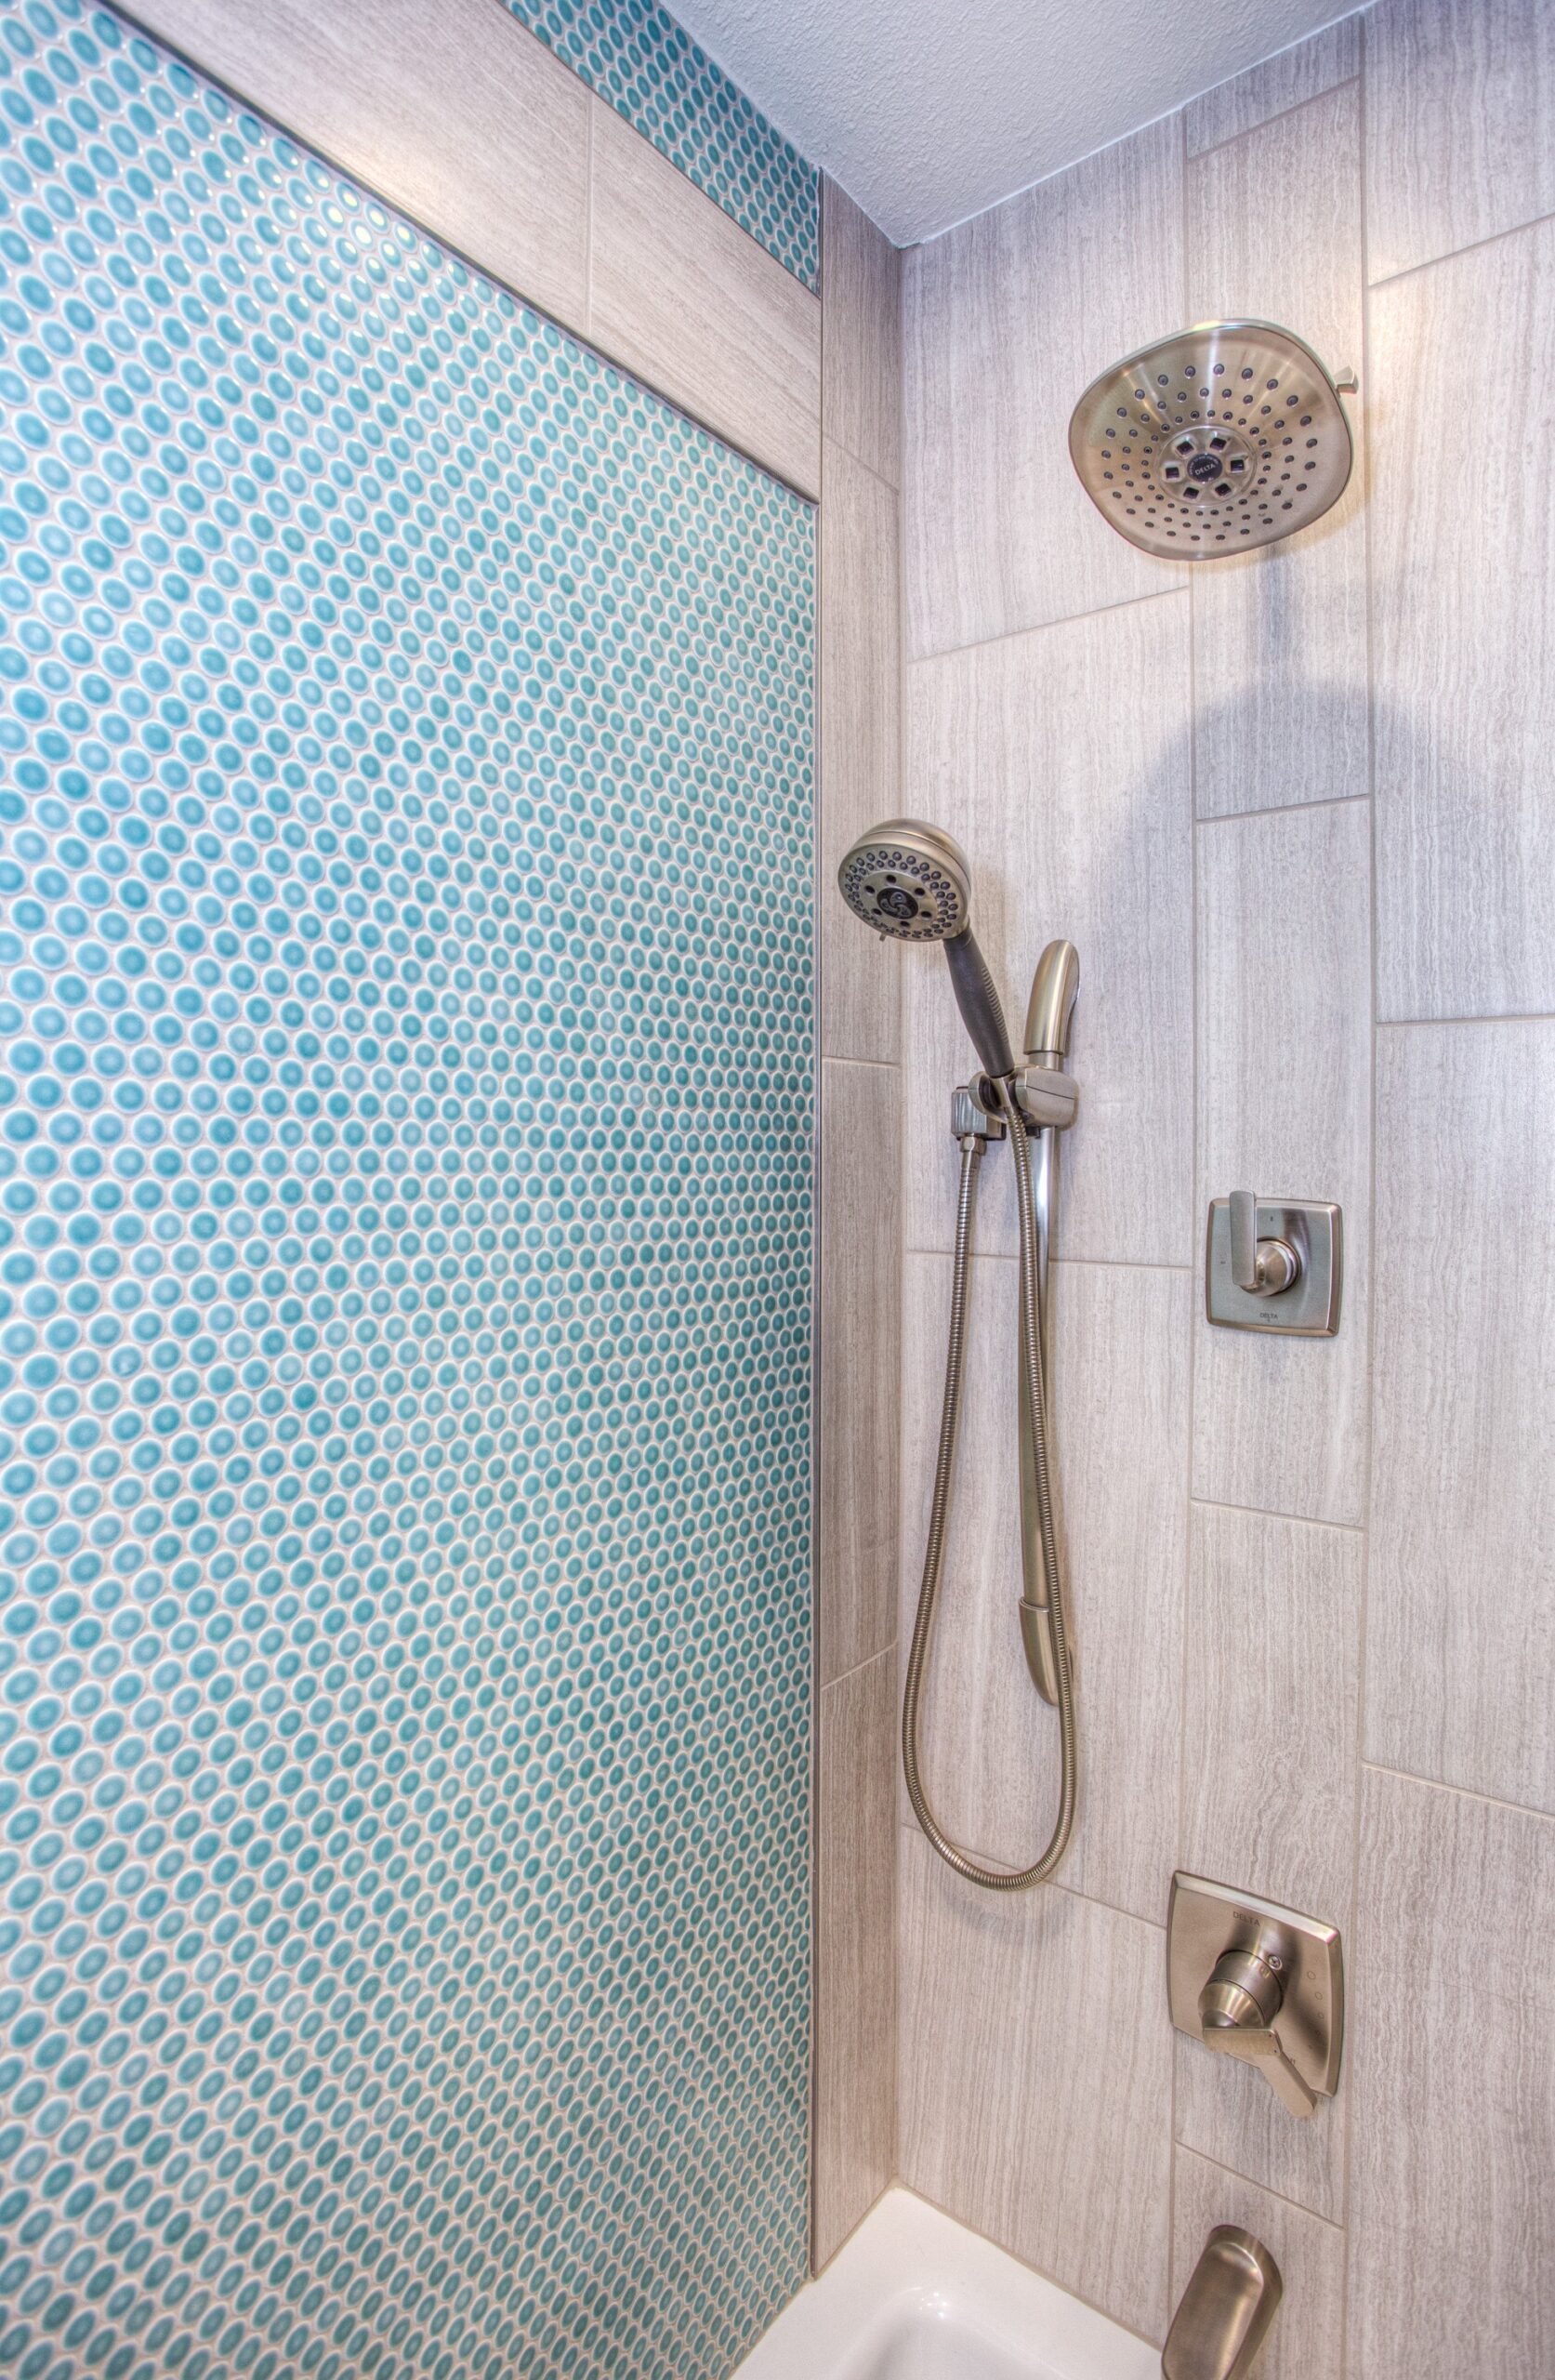 5 Ways To Unclog A Shower Without A Plunger